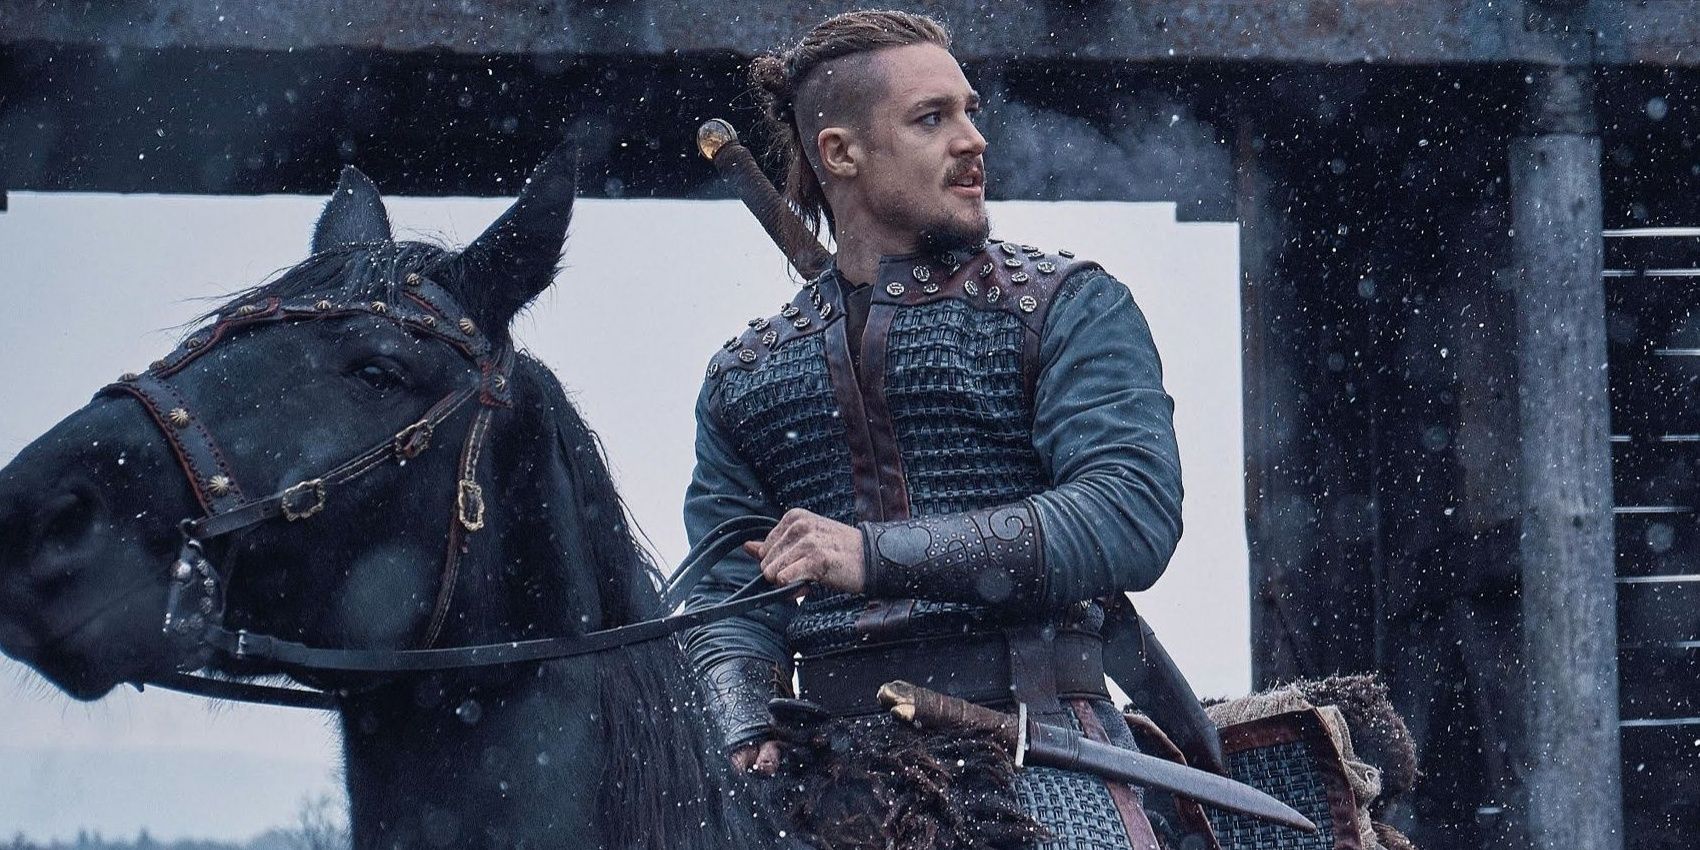 Uhtred in The Last Kingdom